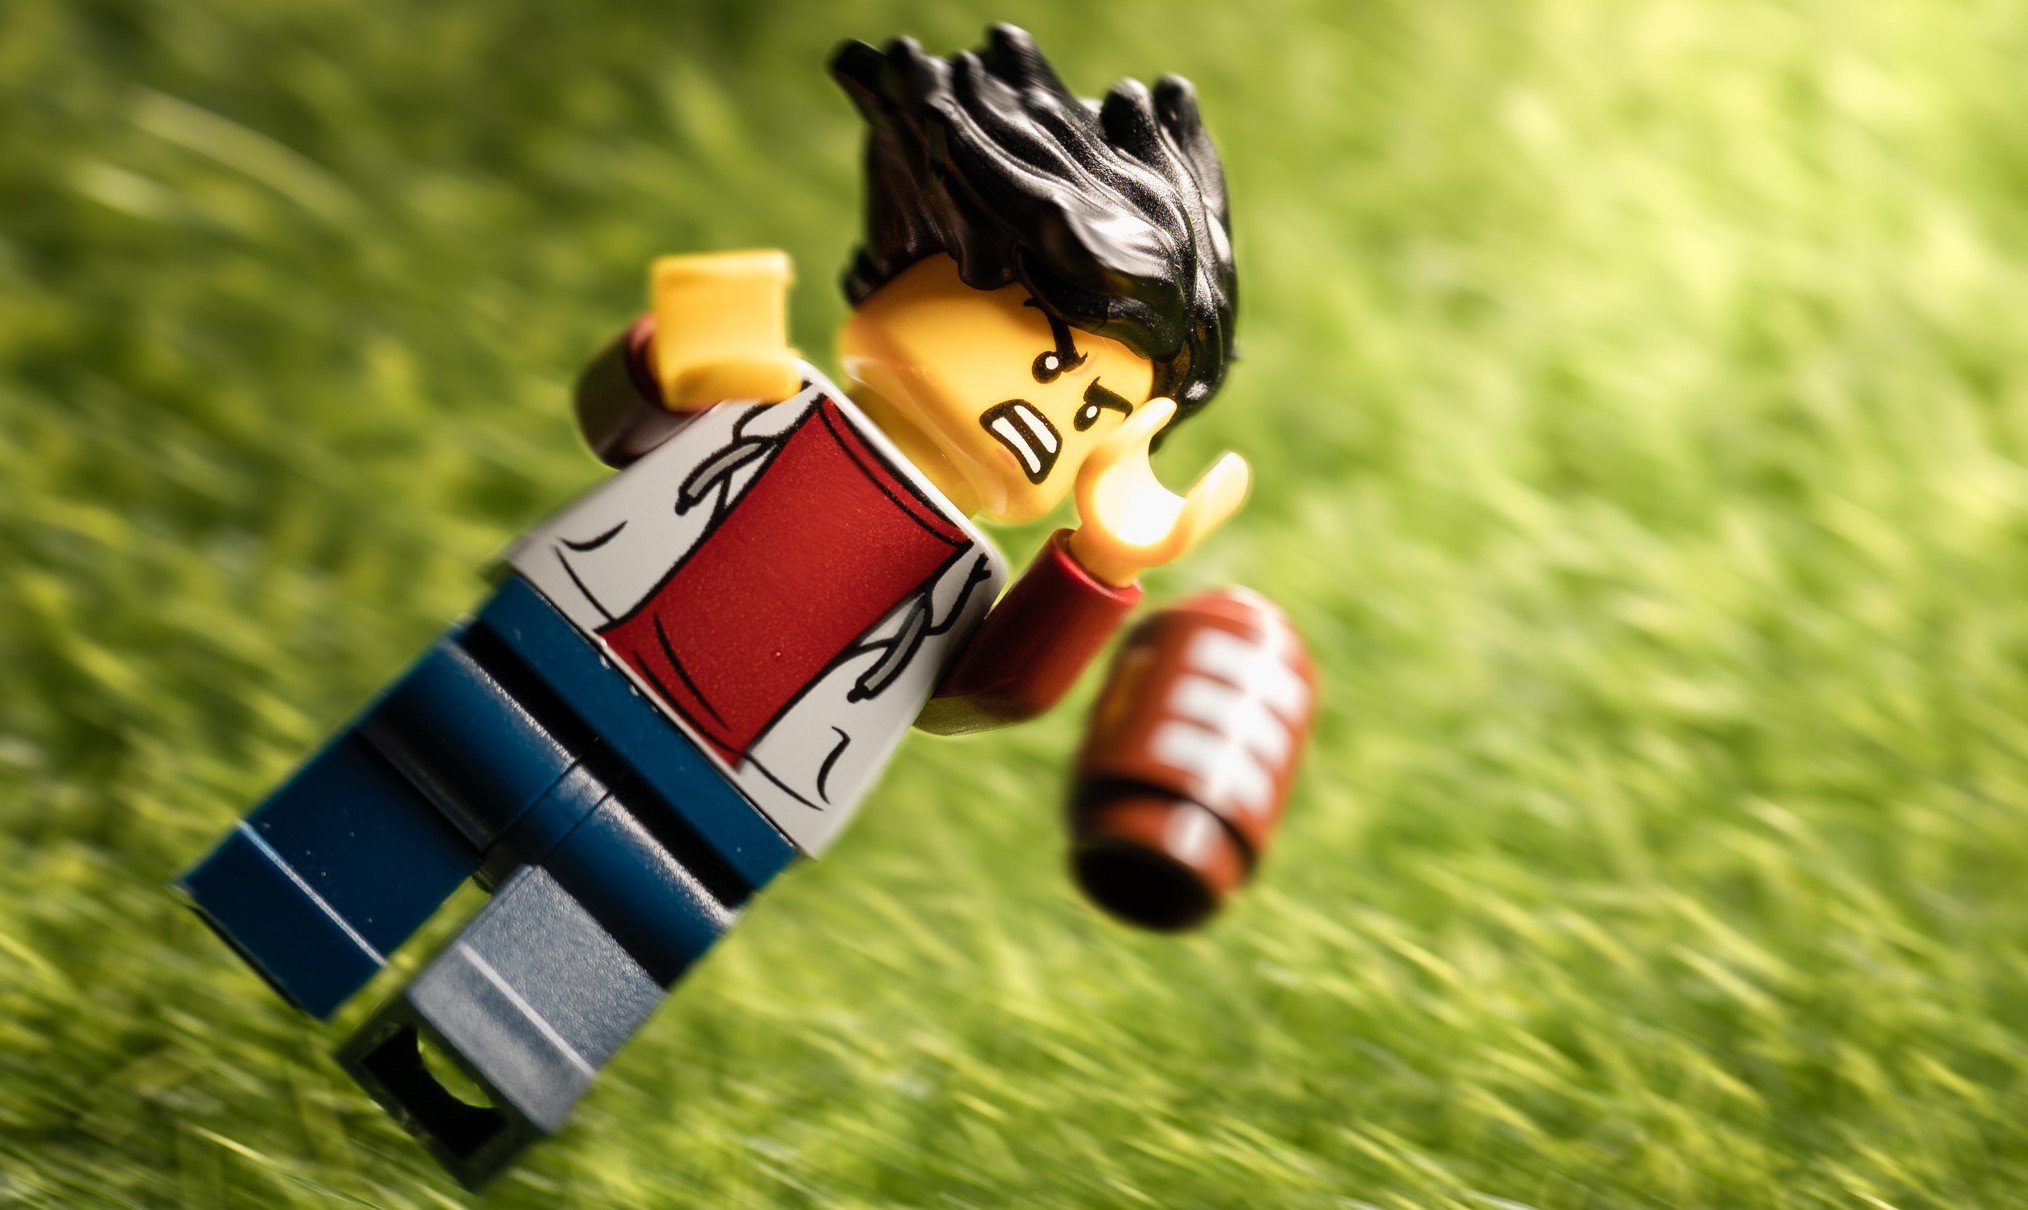 For exercises, the important thing is you enjoy it. Like this LEGO enjoys football.